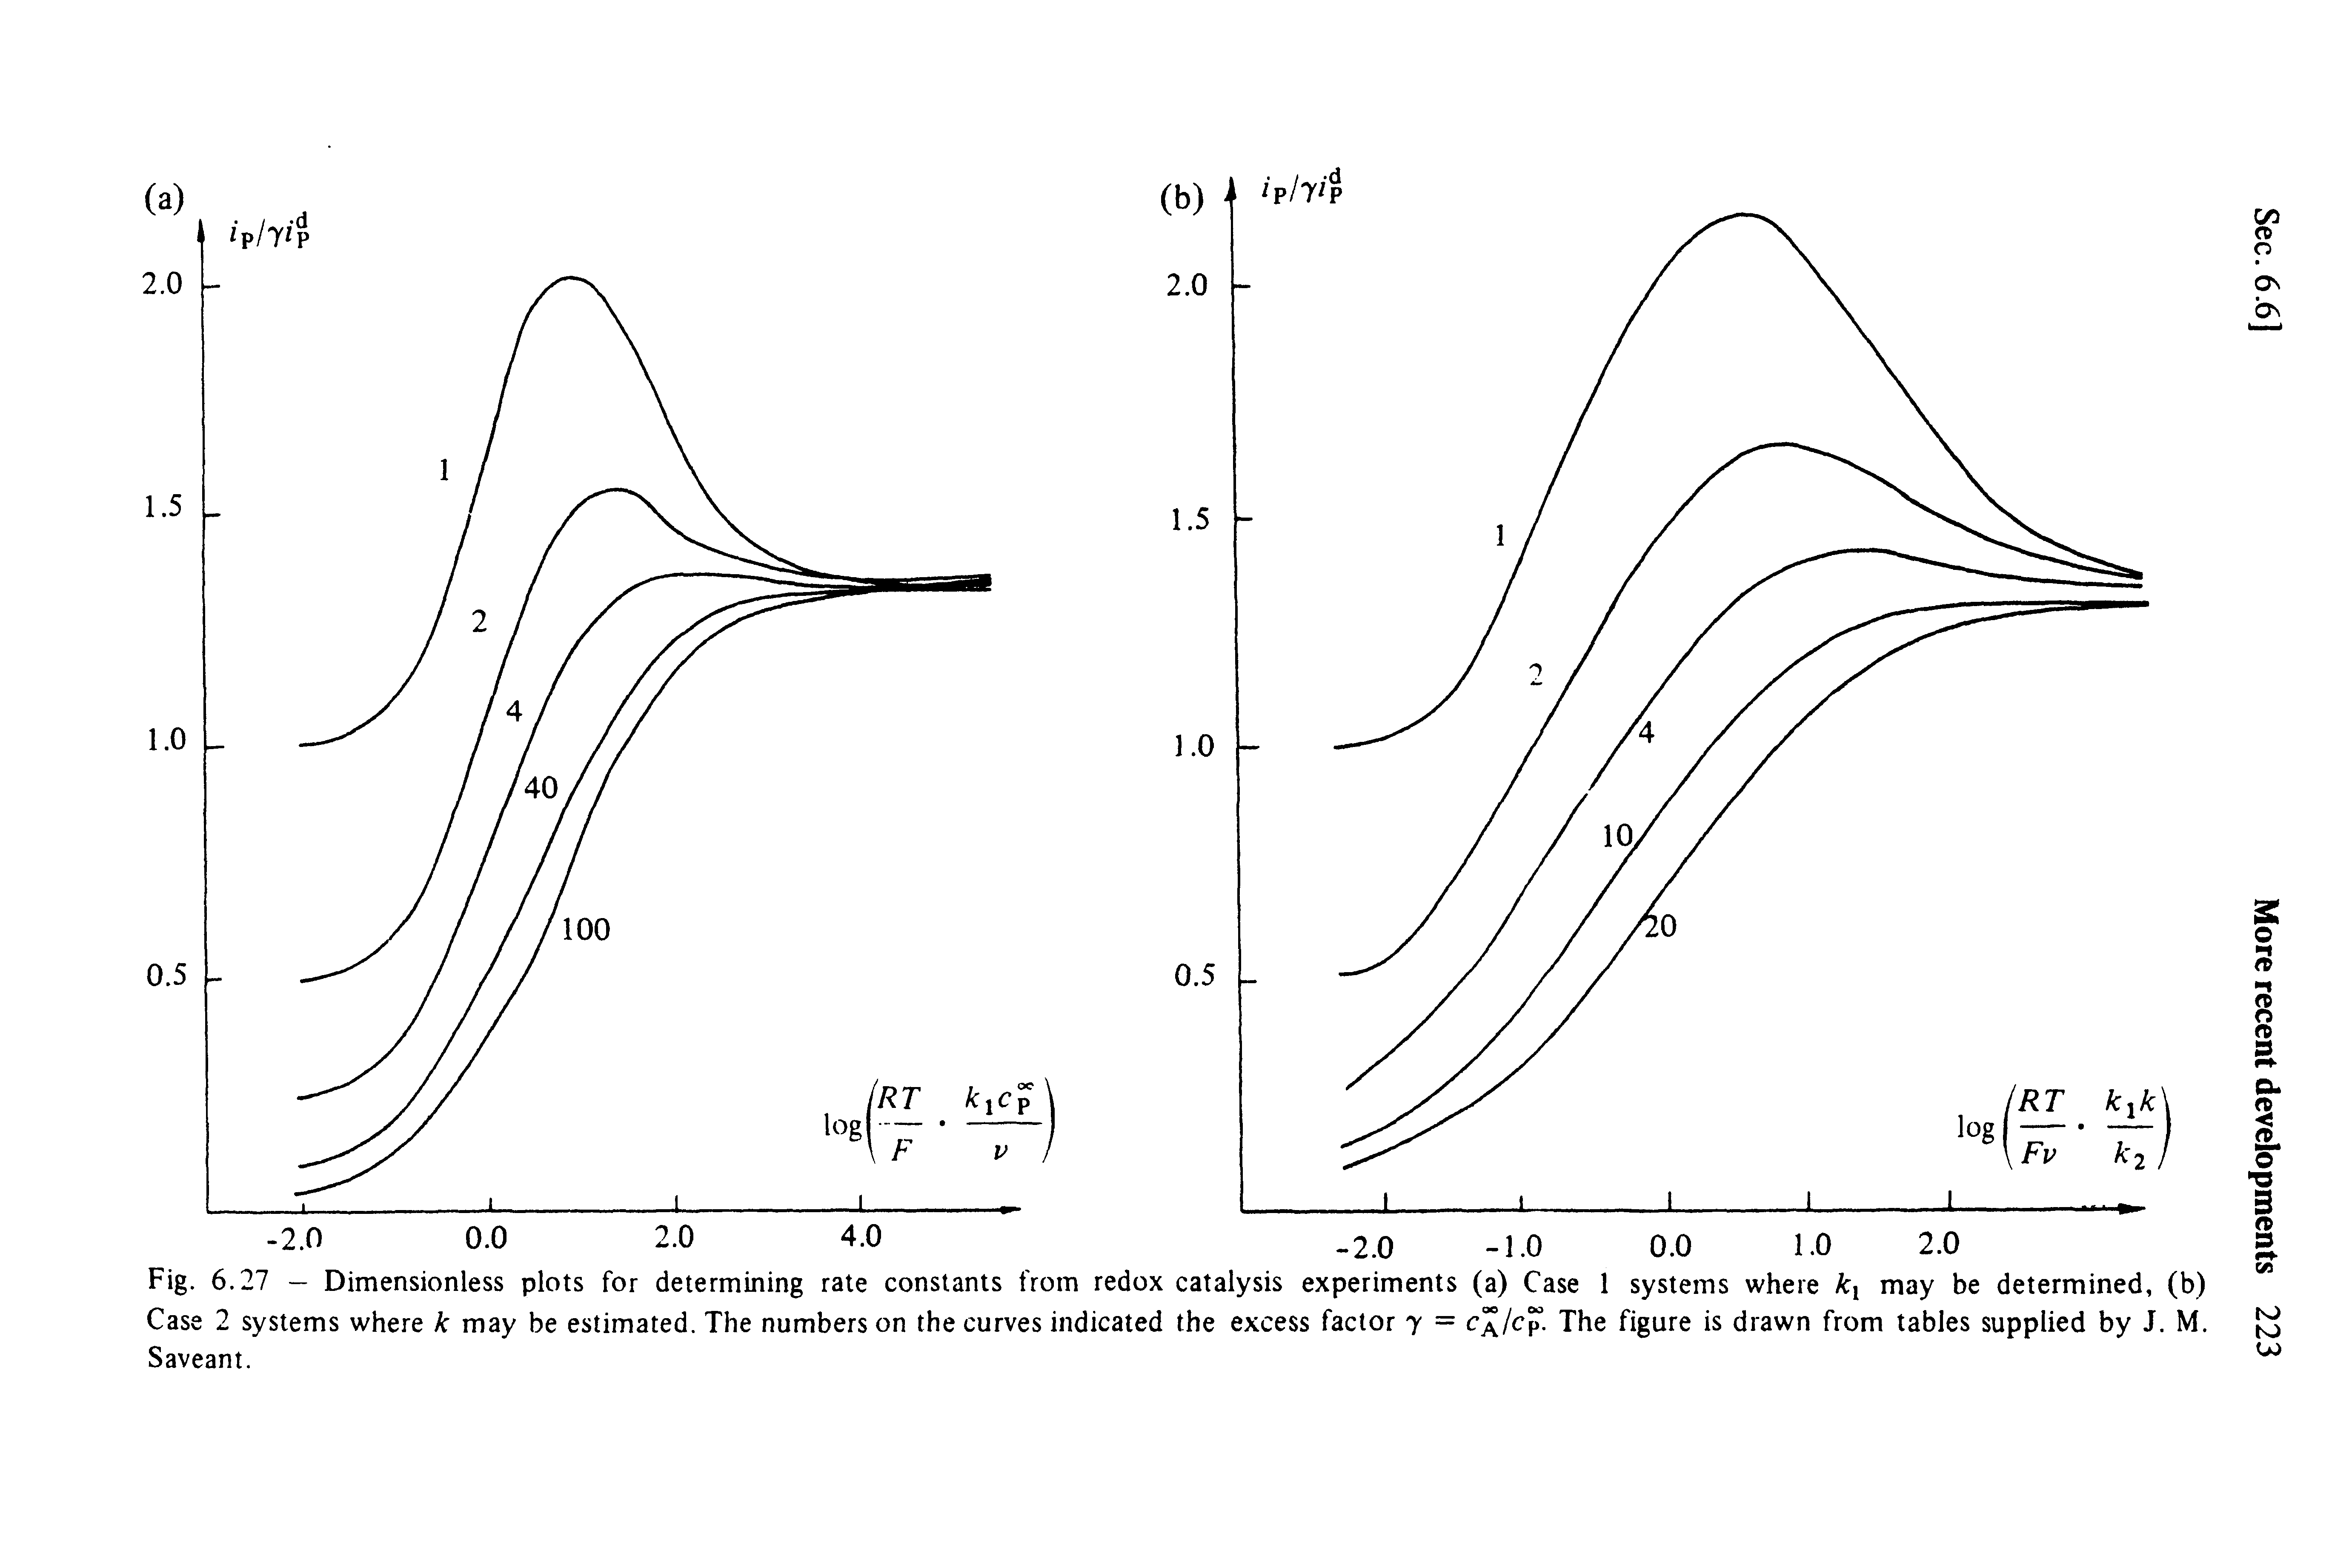 Fig. 6.27 - Dimensionless plots for determining rate constants from redox catalysis experiments (a) Case 1 systems where ki may be determined, (b) Case 2 systems where k may be estimated. The numbers on the curves indicated the excess factor y = c lcp. The figure is drawn from tables supplied by J. M. Saveant.